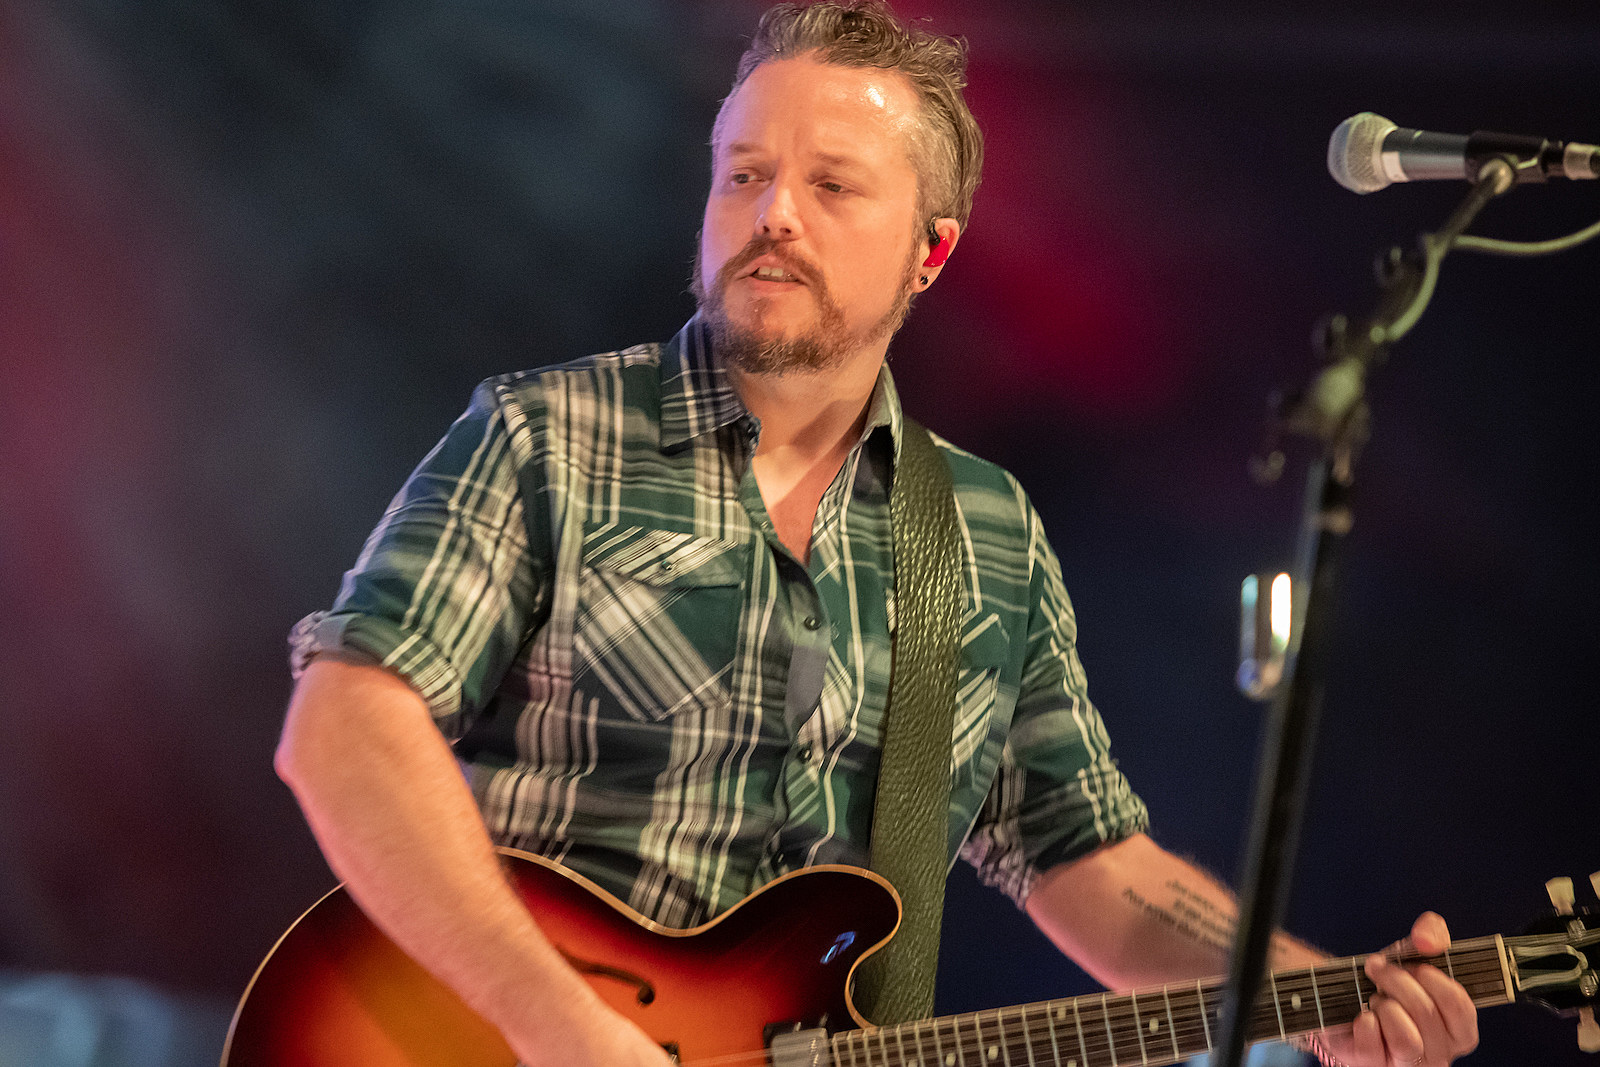 ‘What’ve I Done to Help’ Jason Isbell Wonders in New Song [LISTEN